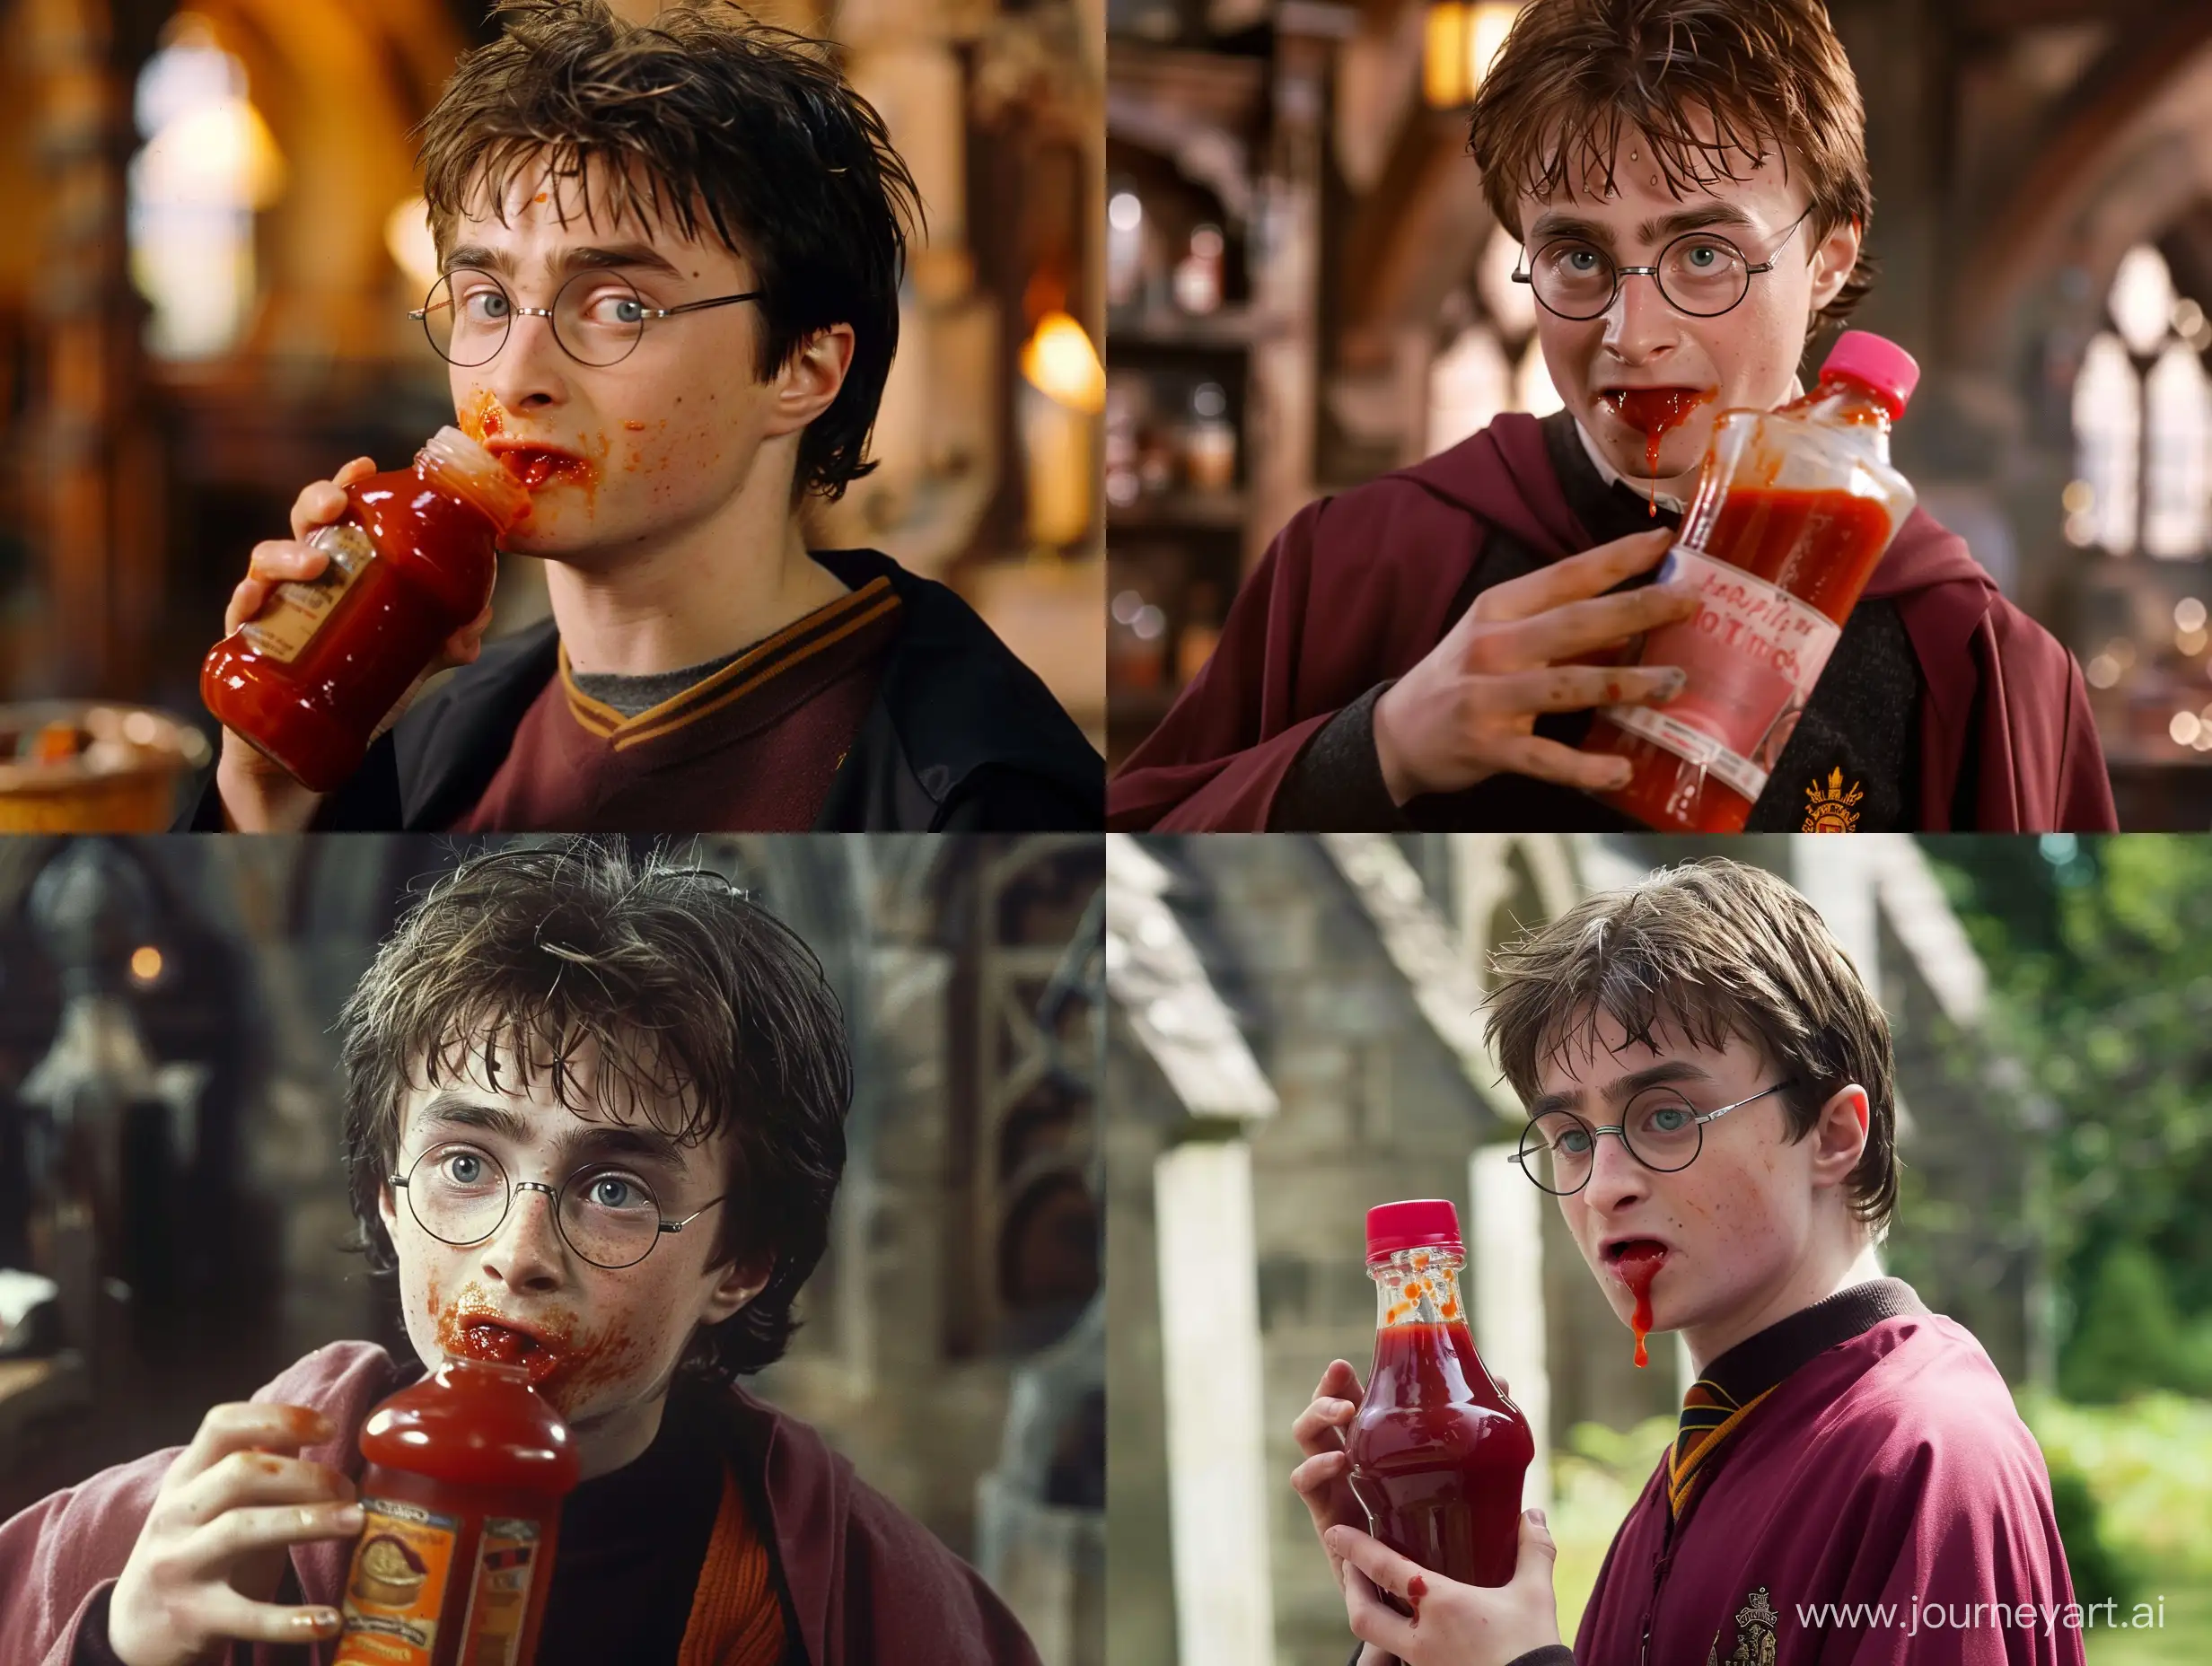 Harry Potter eating ketchup from the bottle